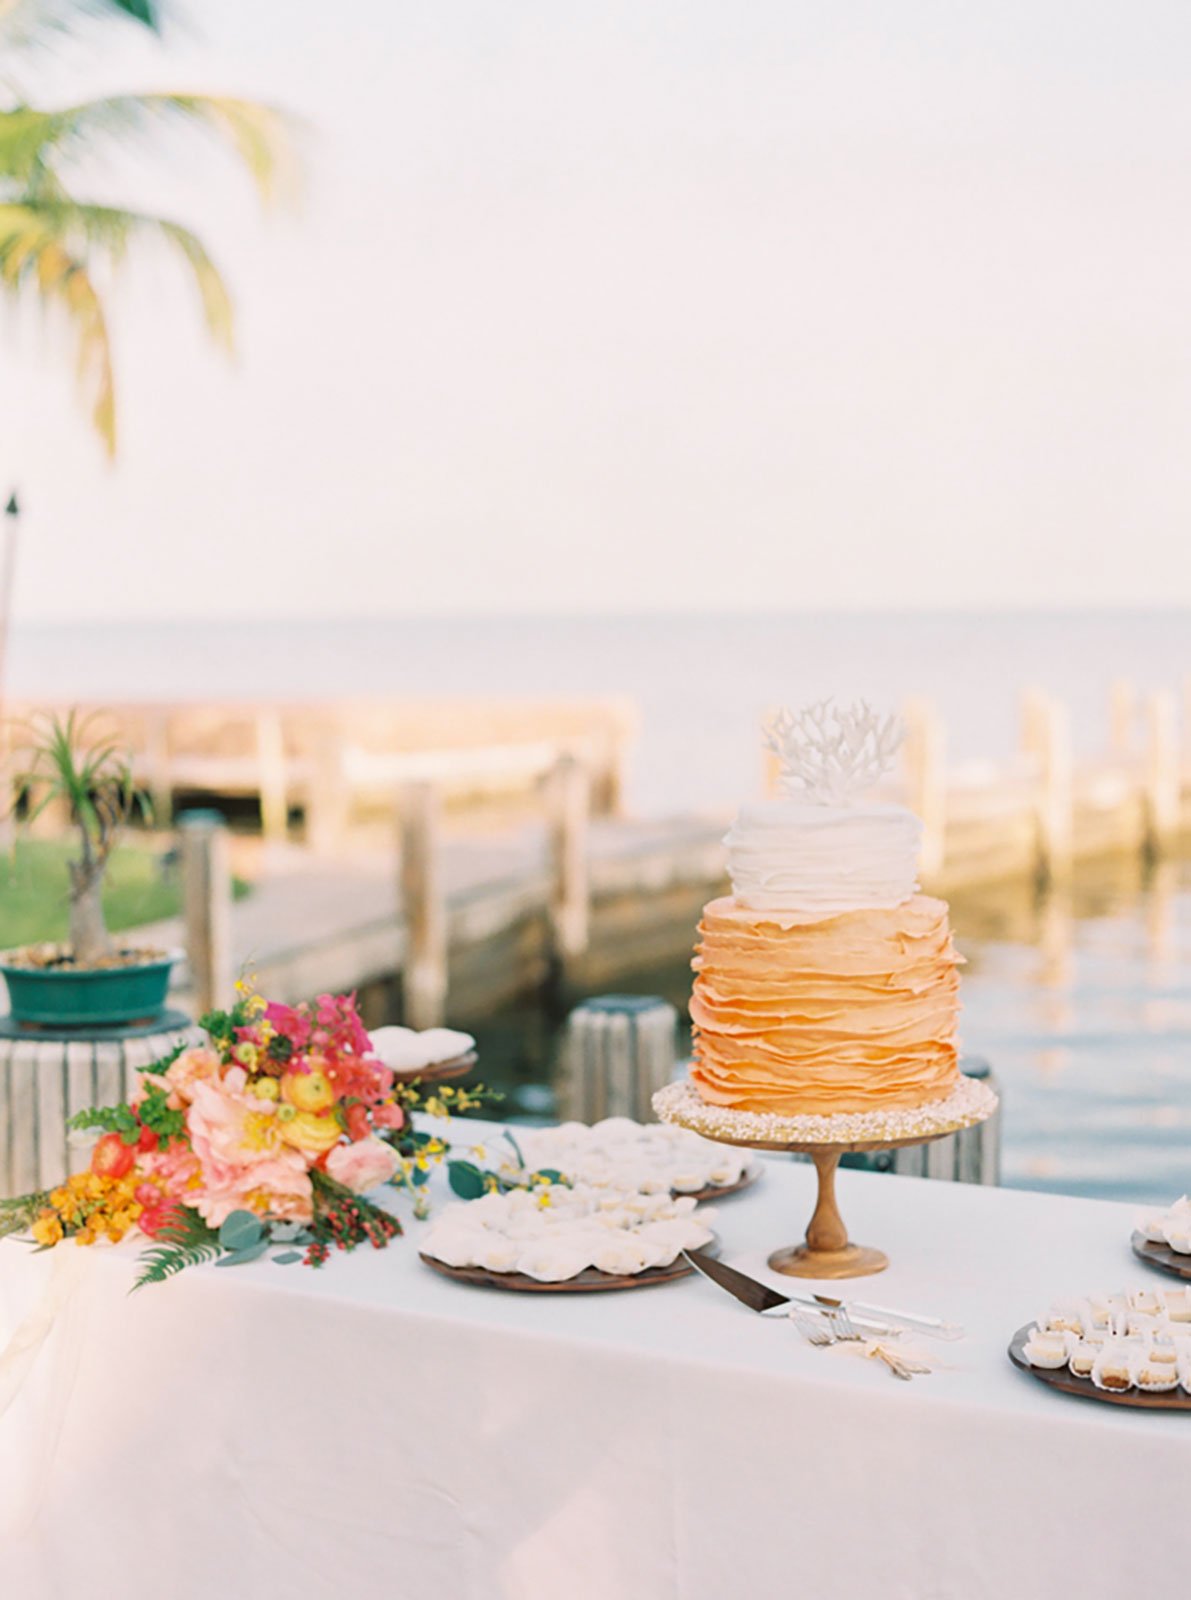 Orange and White Ombre Wedding Cake with Ruffled Fondant and Guava Cheesecake Filling